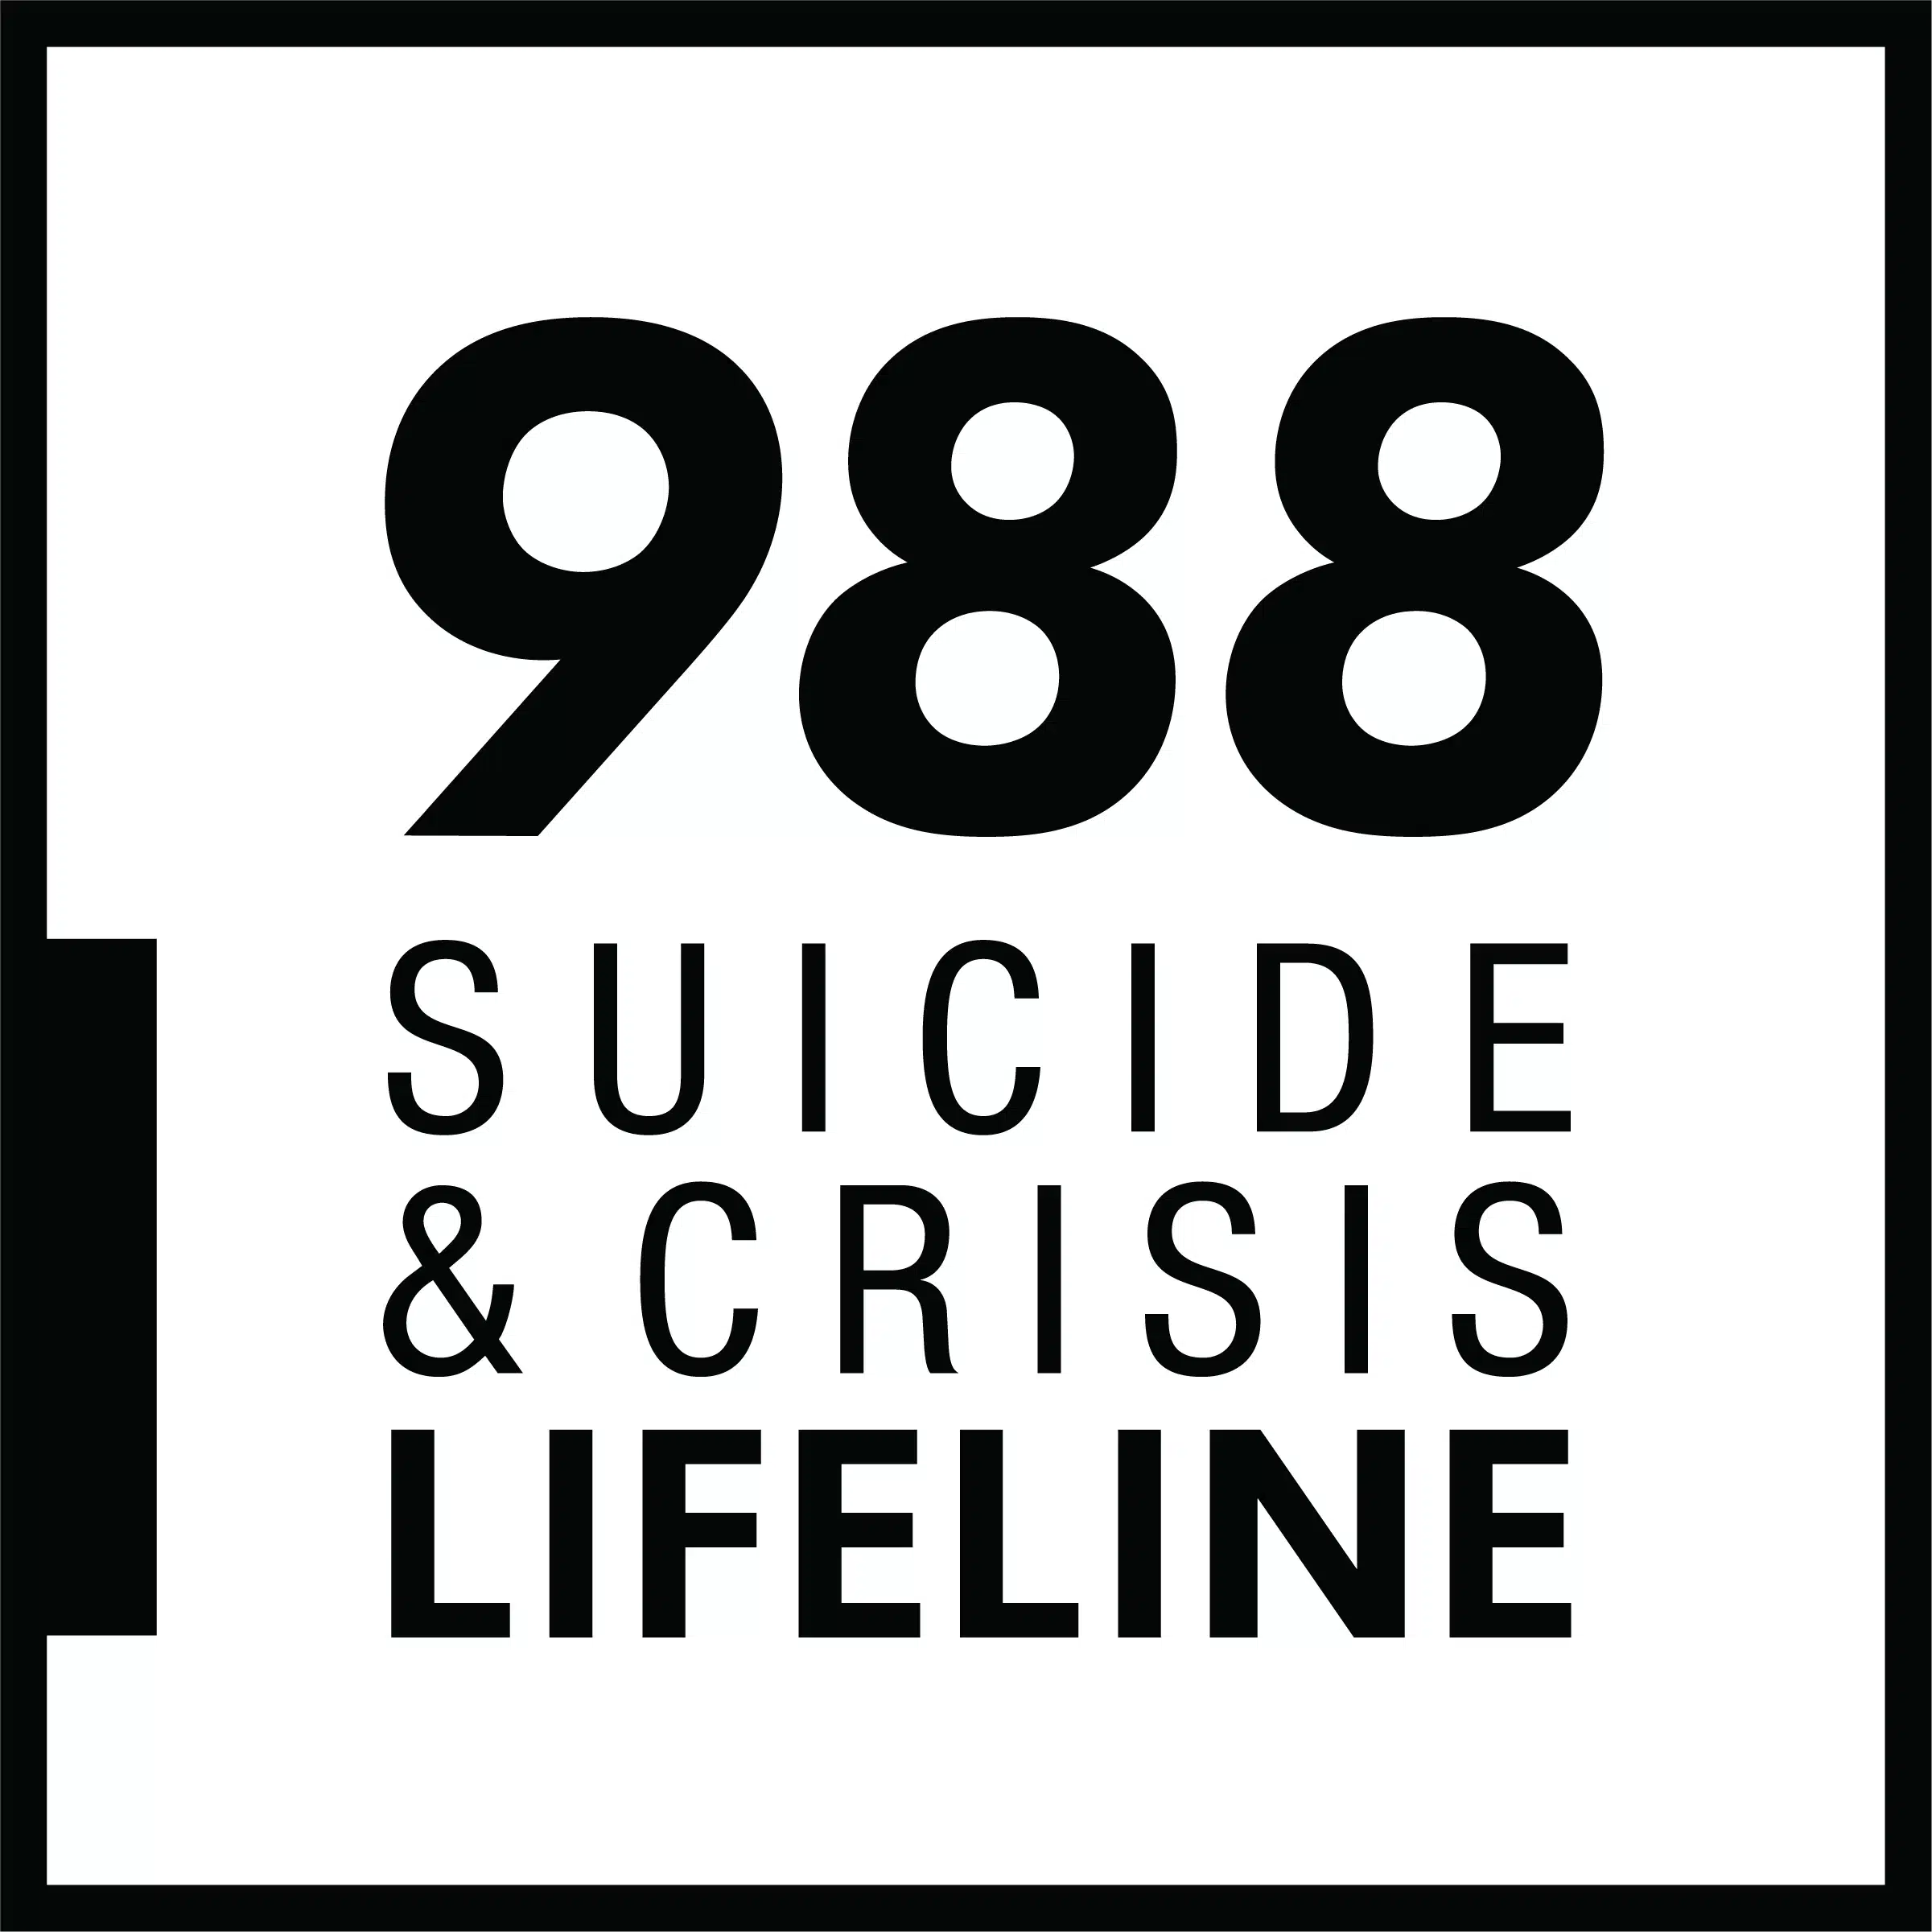 if you or someone you know needs support call or text 988 crisis & suicide hotline today